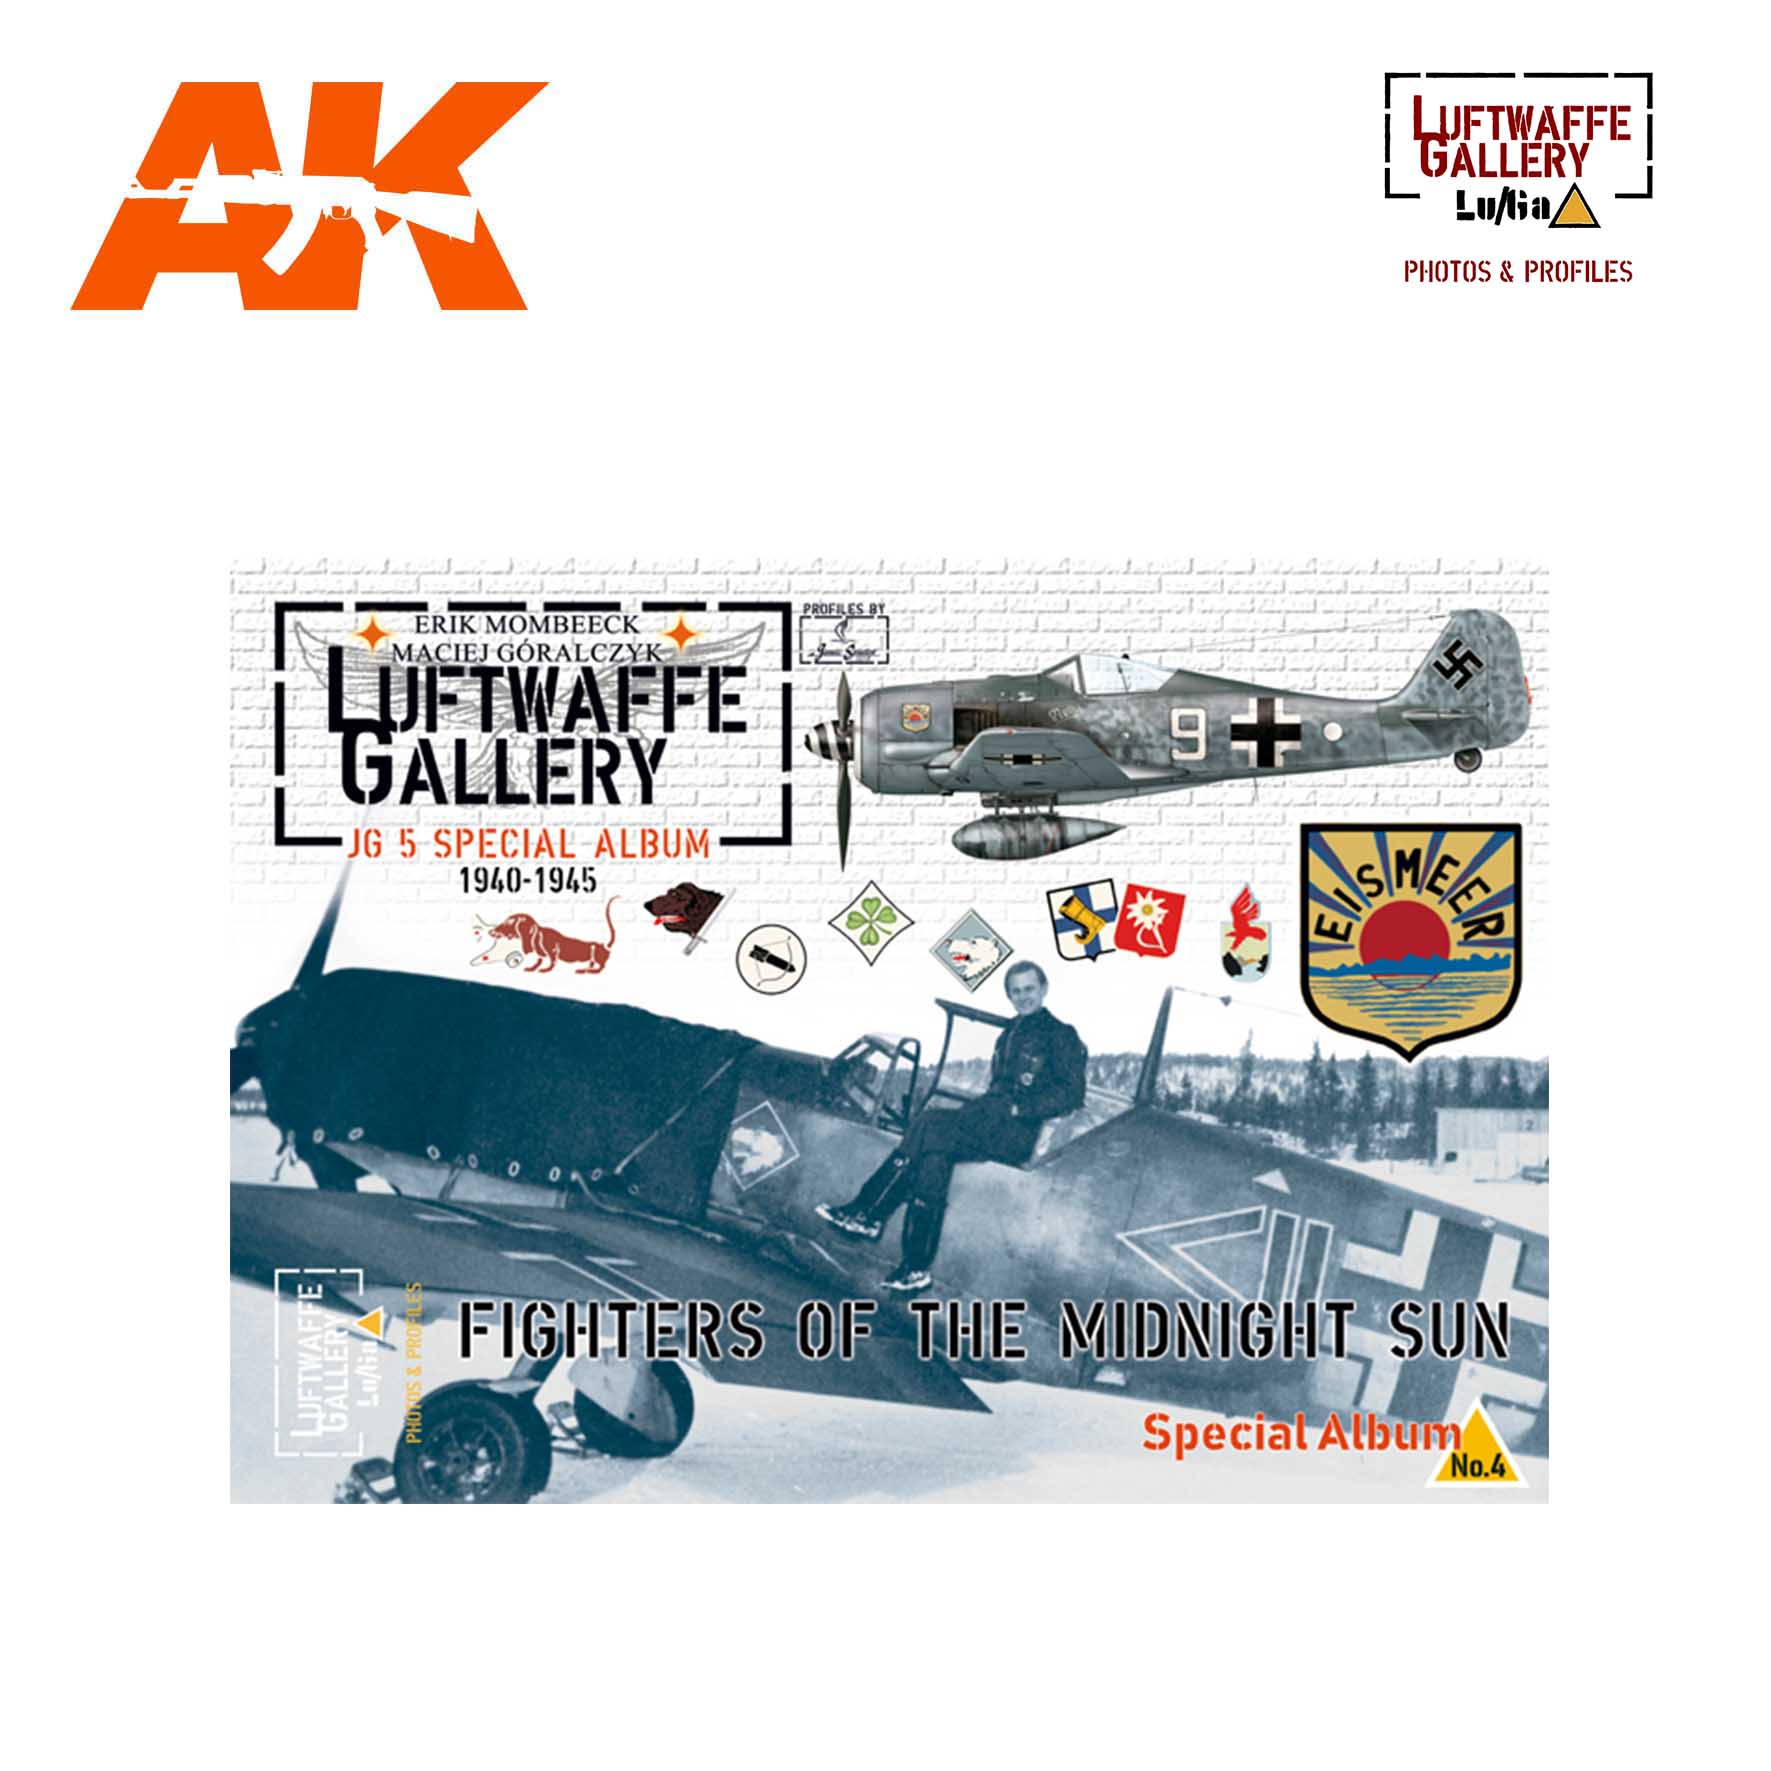 SPECIAL Luftwaffe Gallery 4 – JG 5 ‘Fighters of the Midnight Sun’